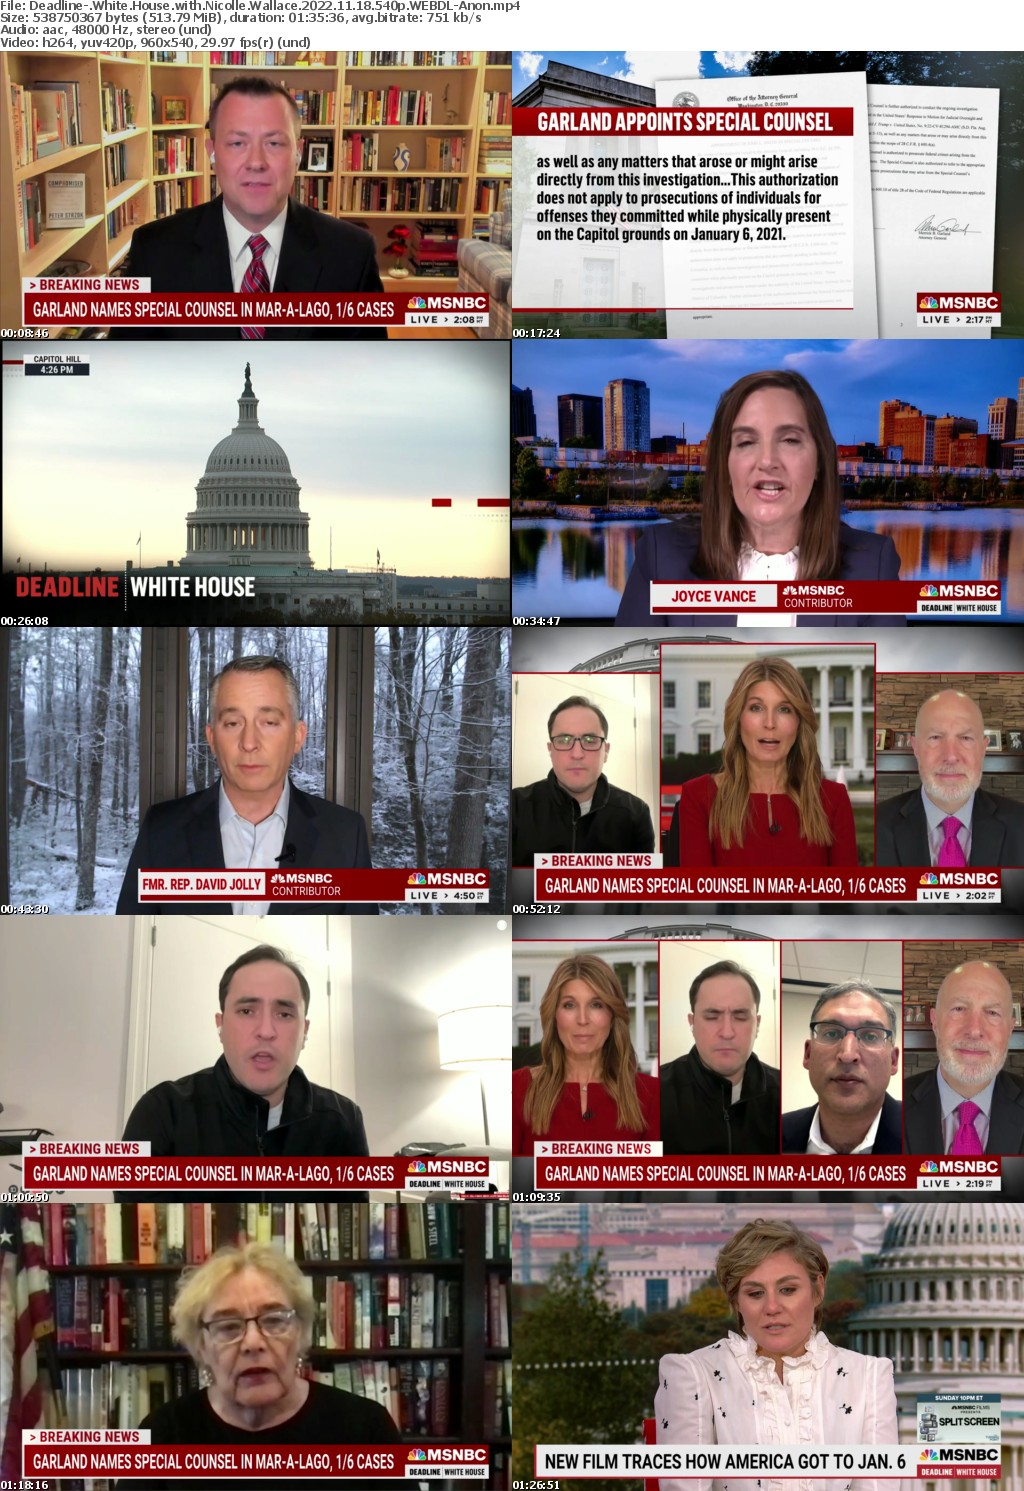 Deadline- White House with Nicolle Wallace 2022 11 18 540p WEBDL-Anon